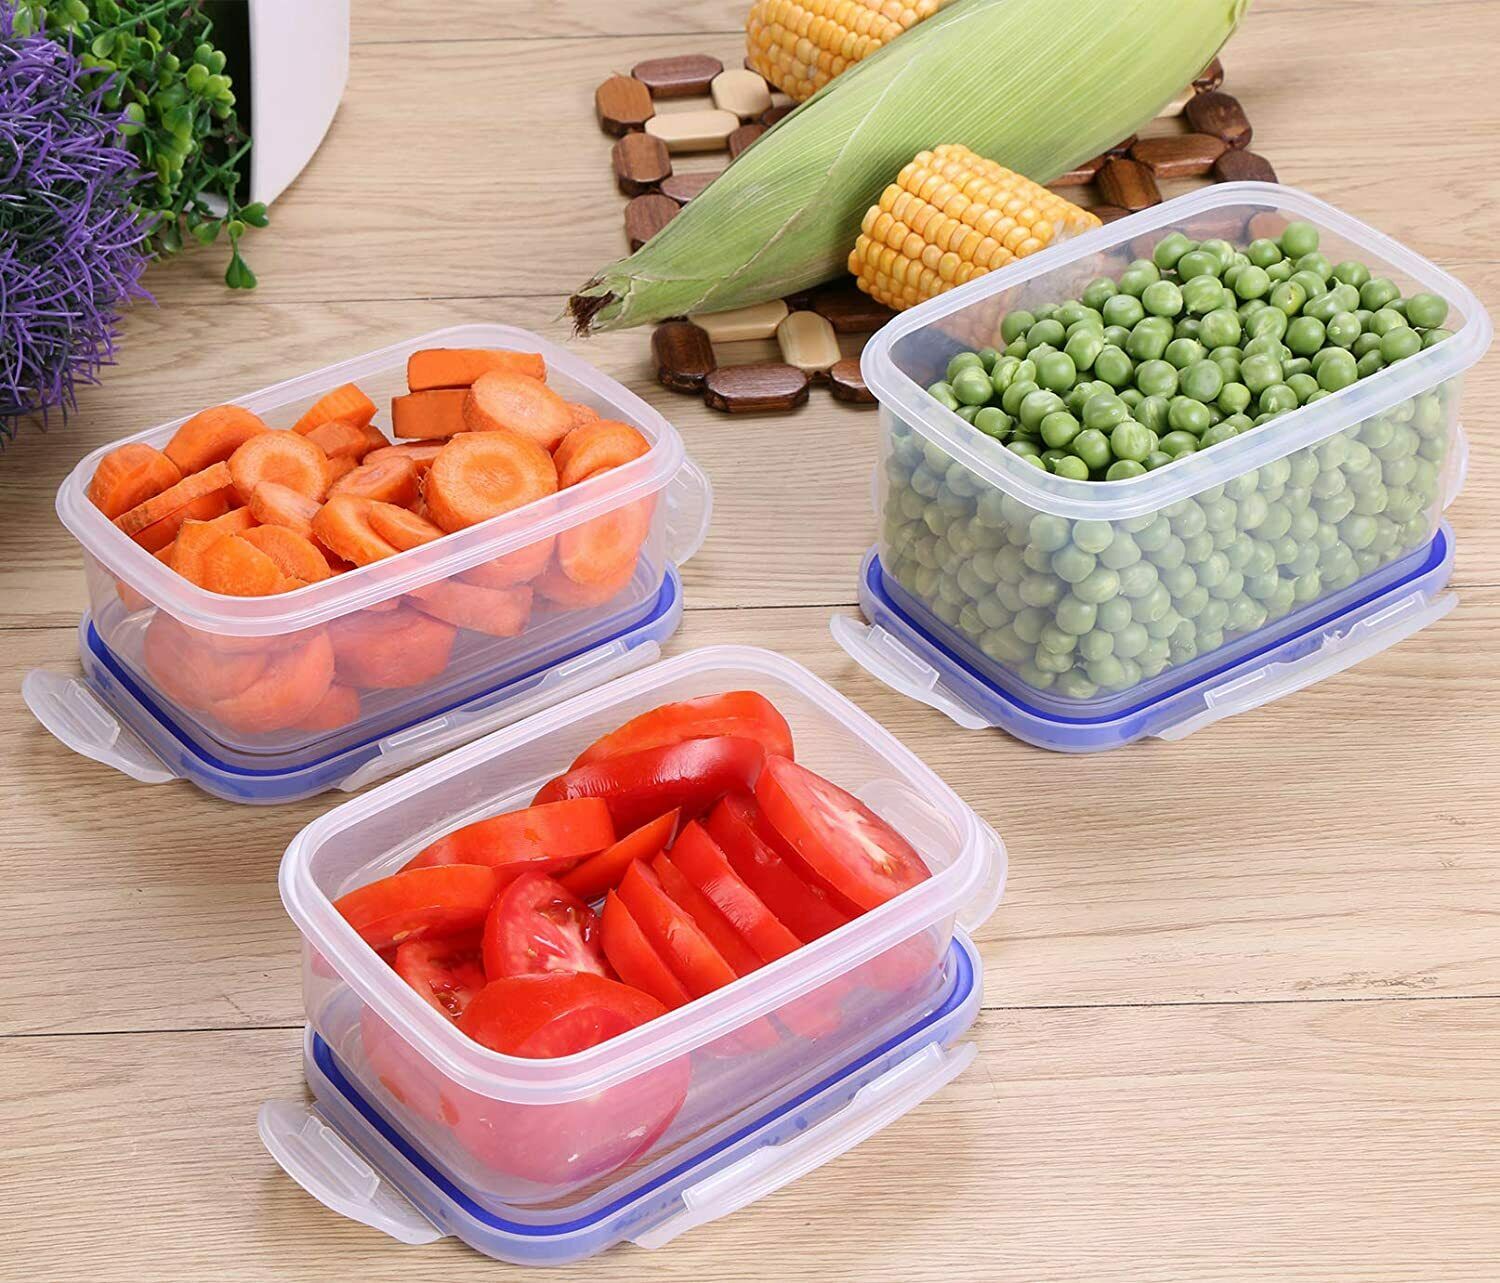 18 Pieces Plastic Food Containers set